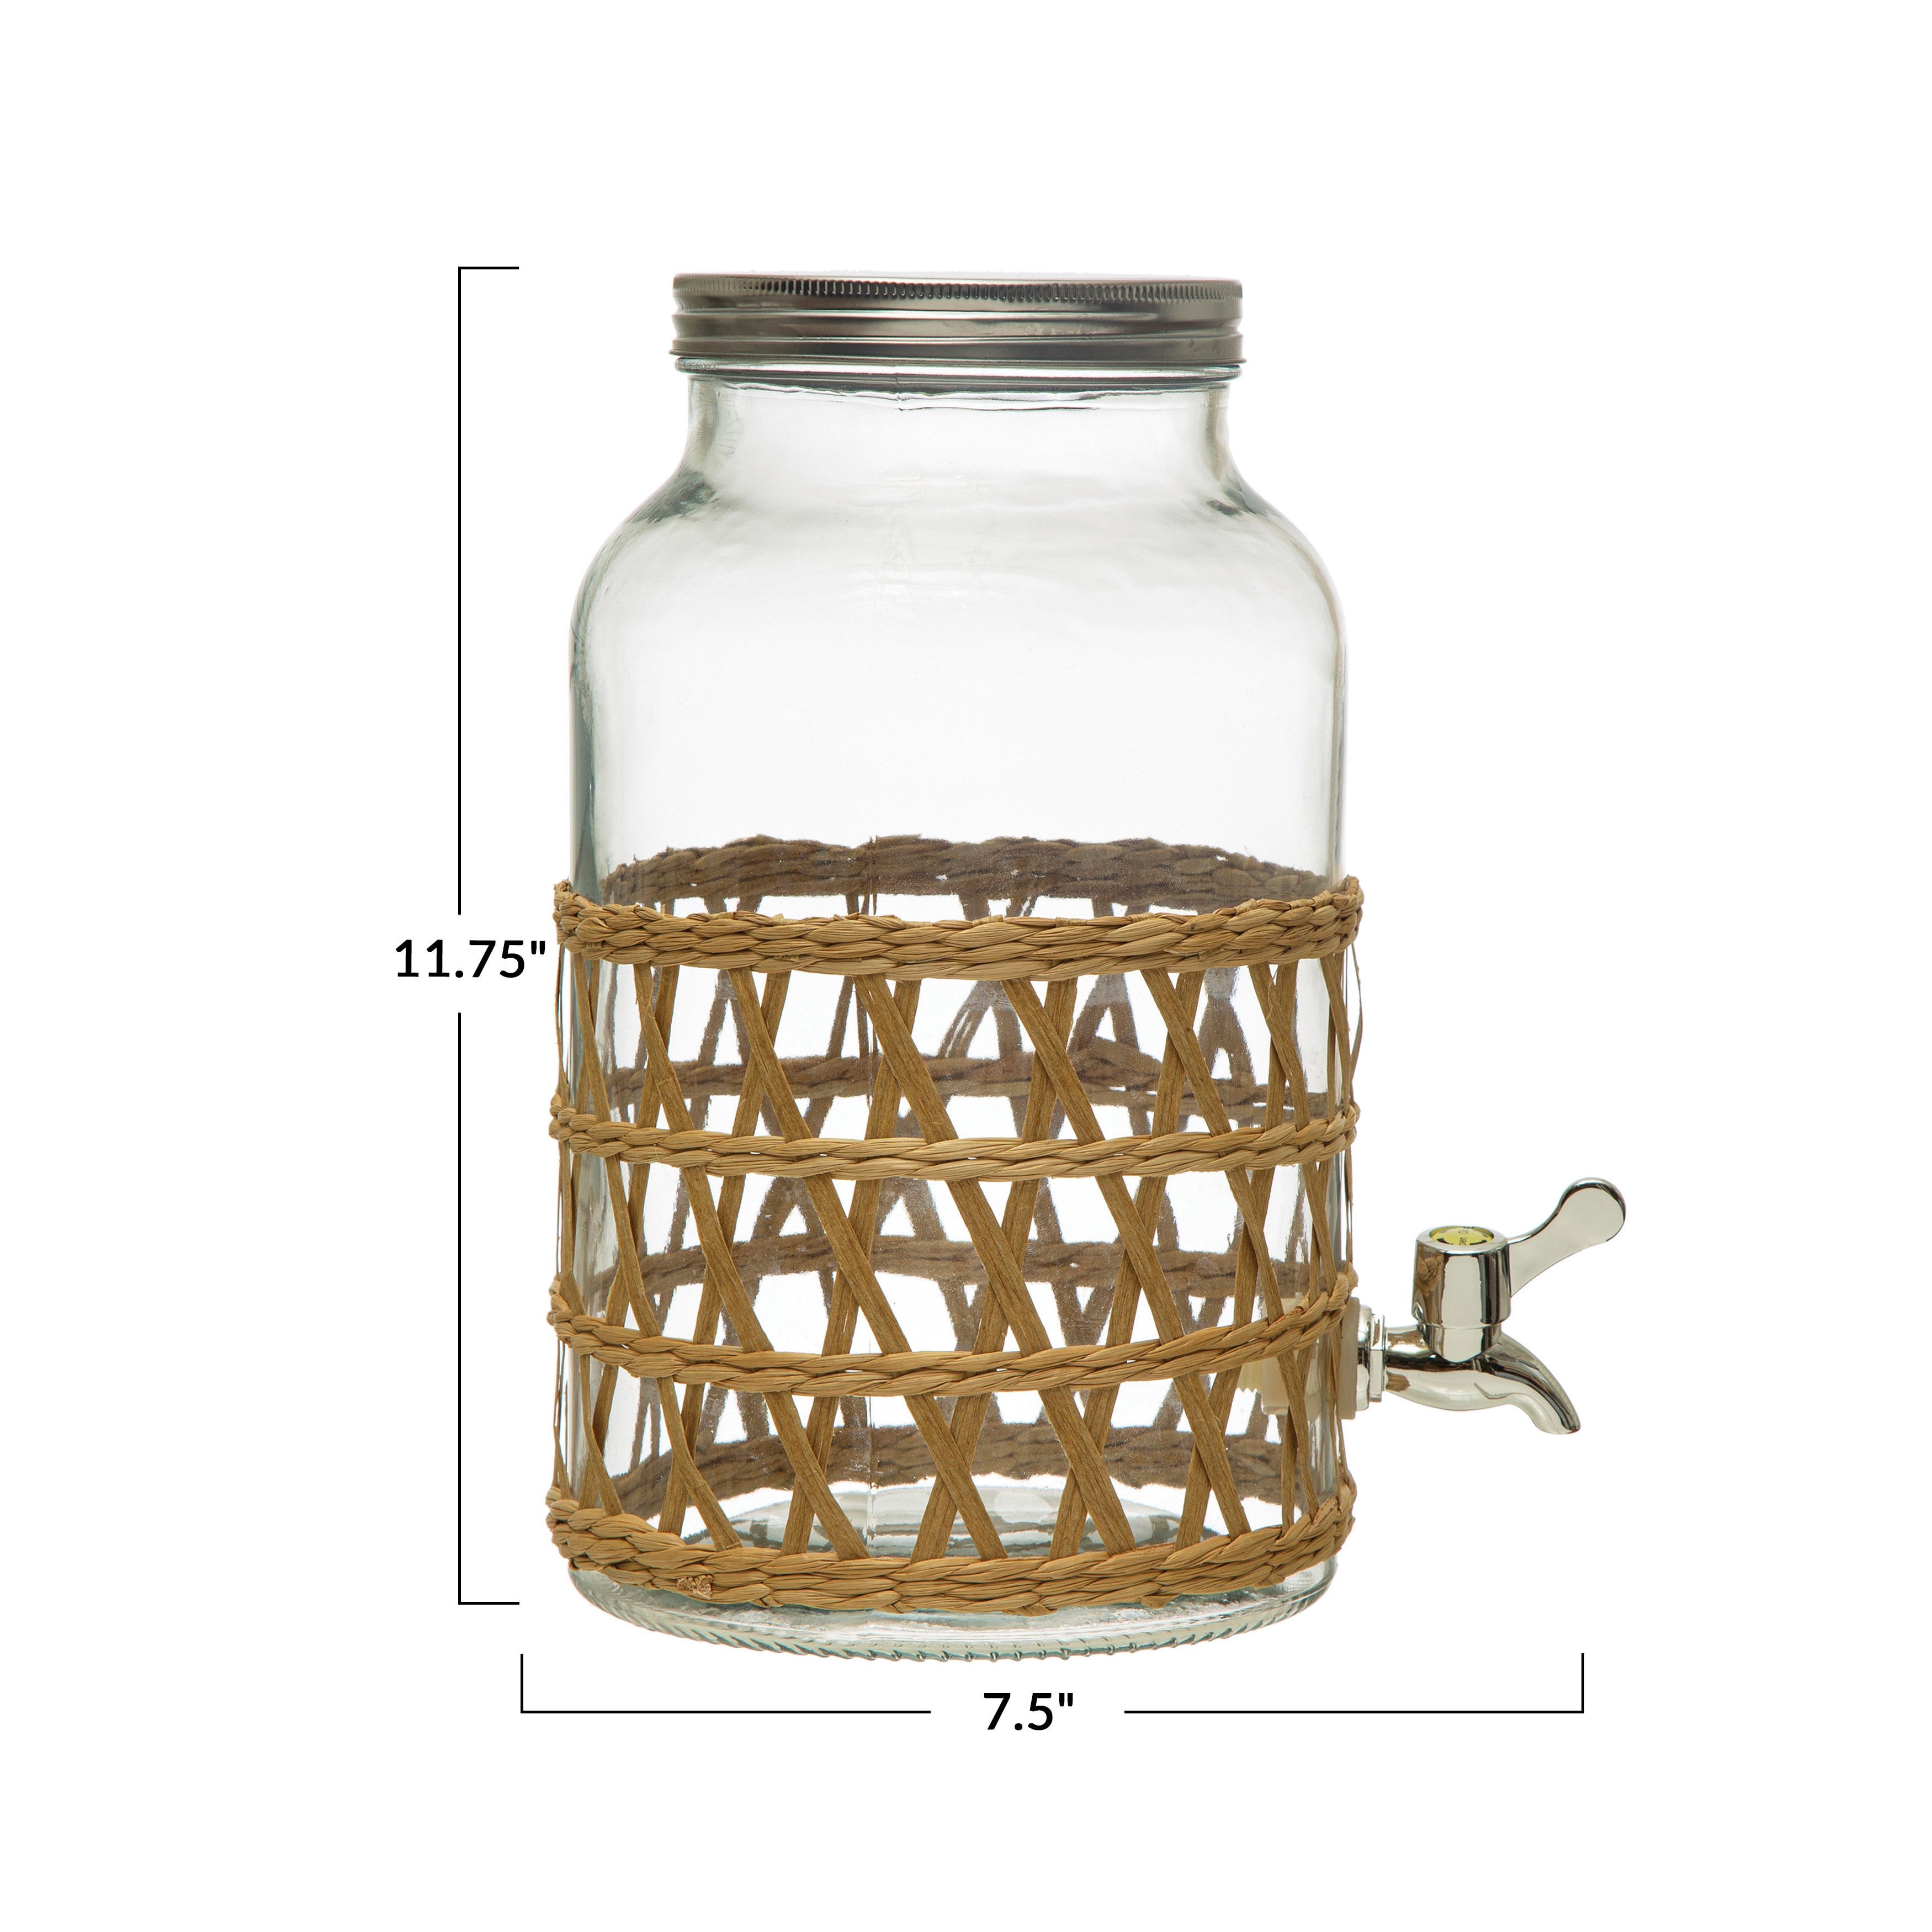 https://ak1.ostkcdn.com/images/products/is/images/direct/15c3ca651df7b92d6e7c708e2efb4e380e4b1afa/Glass-Jar-Beverage-Dispenser-with-Woven-Seagrass-Sleeve.jpg